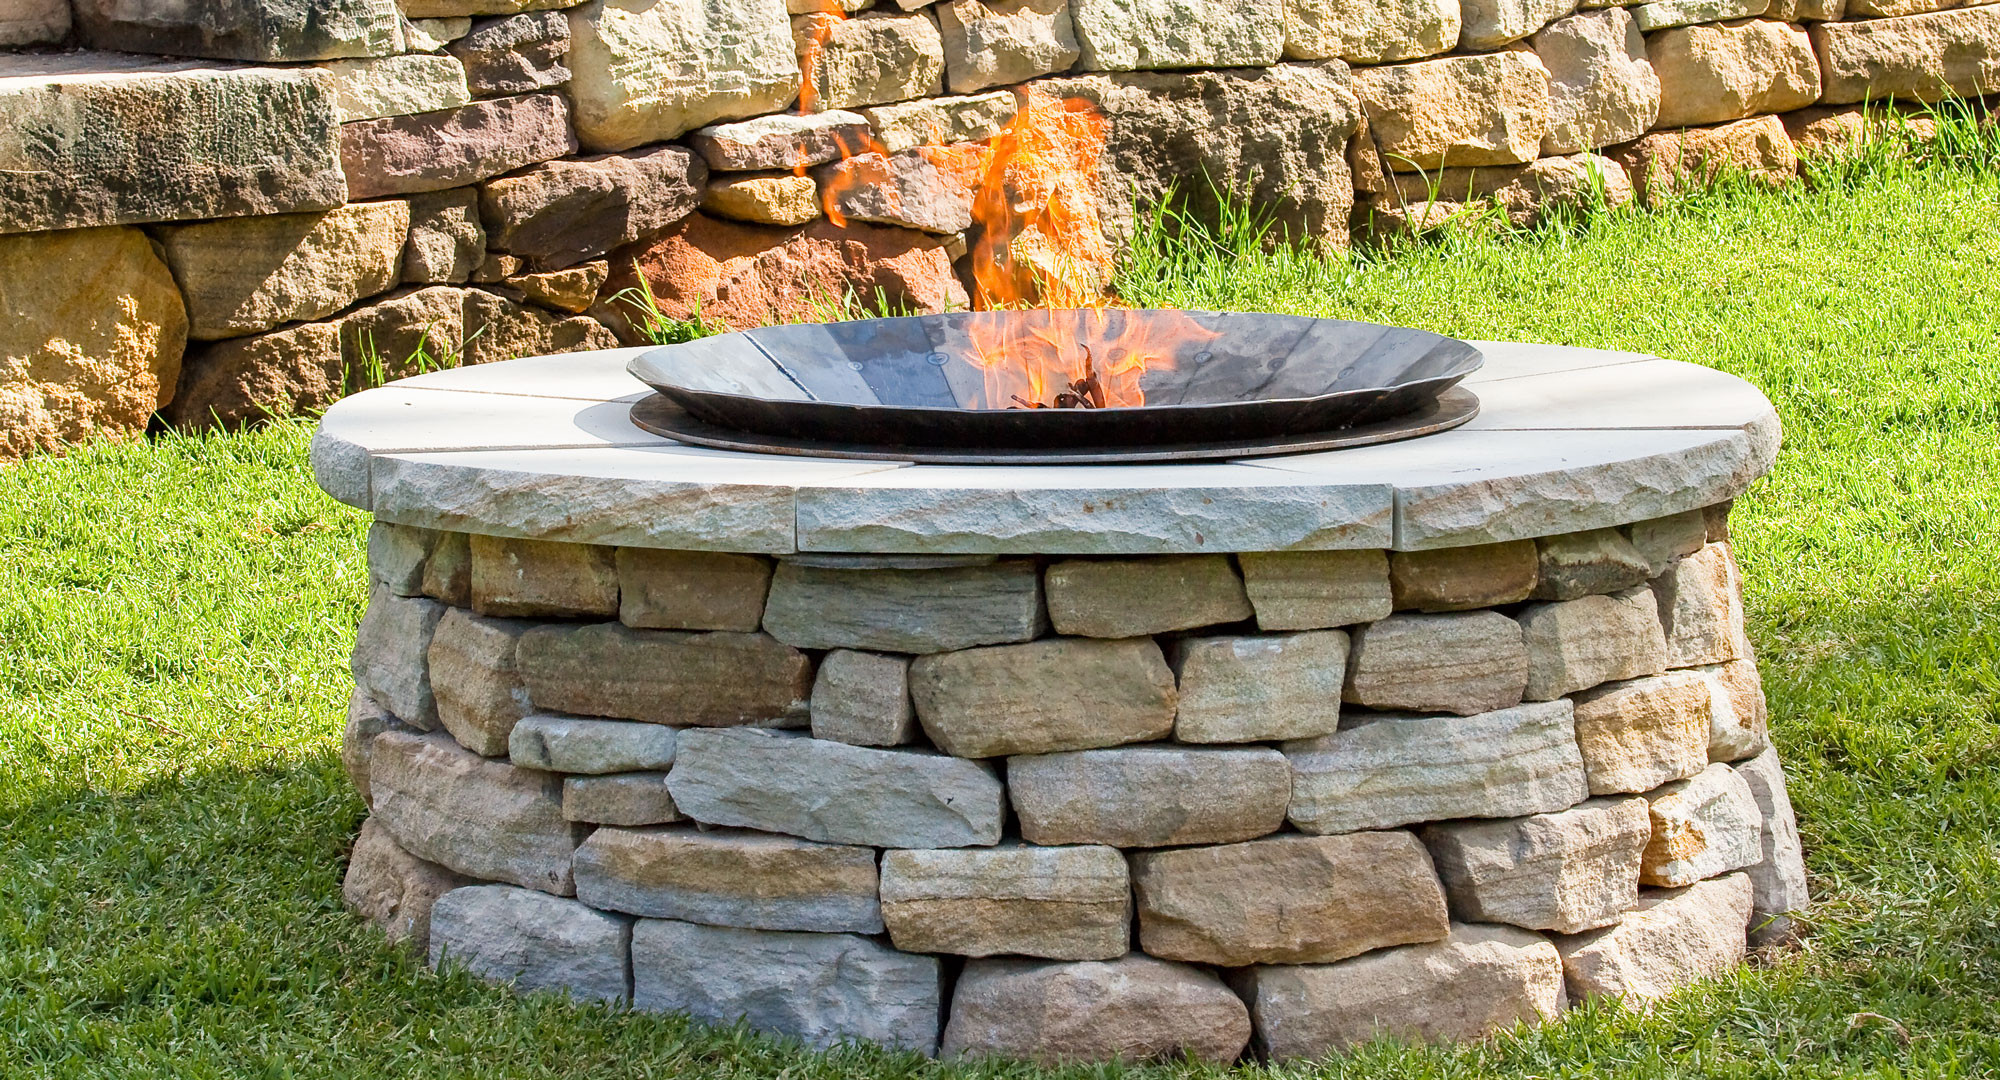 Build Your Own Outdoor Firepit
 Make your own backyard fire pit